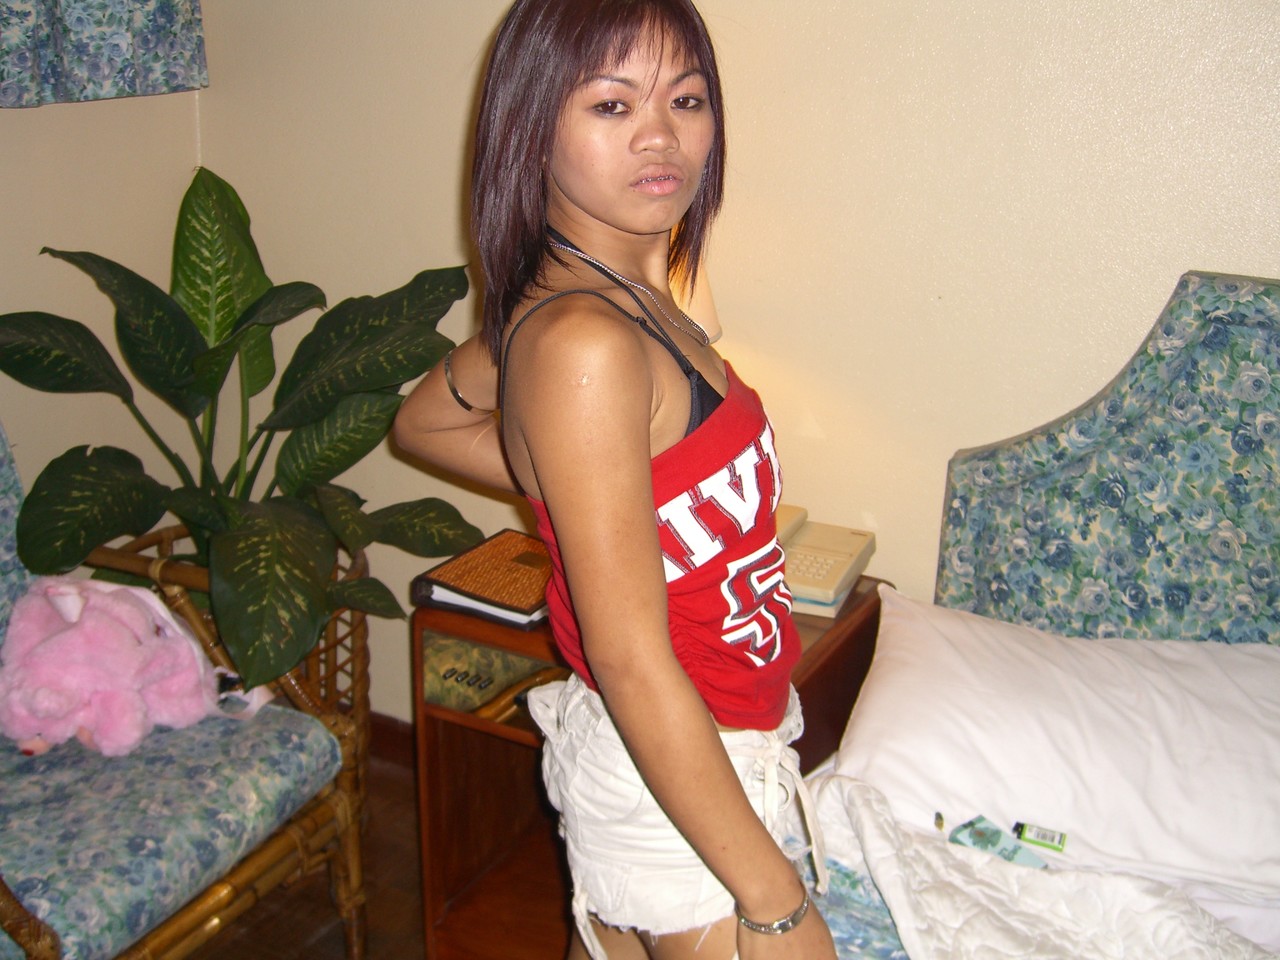 Filipina amateur licks her lips while getting totally naked on a bed foto porno #426918642